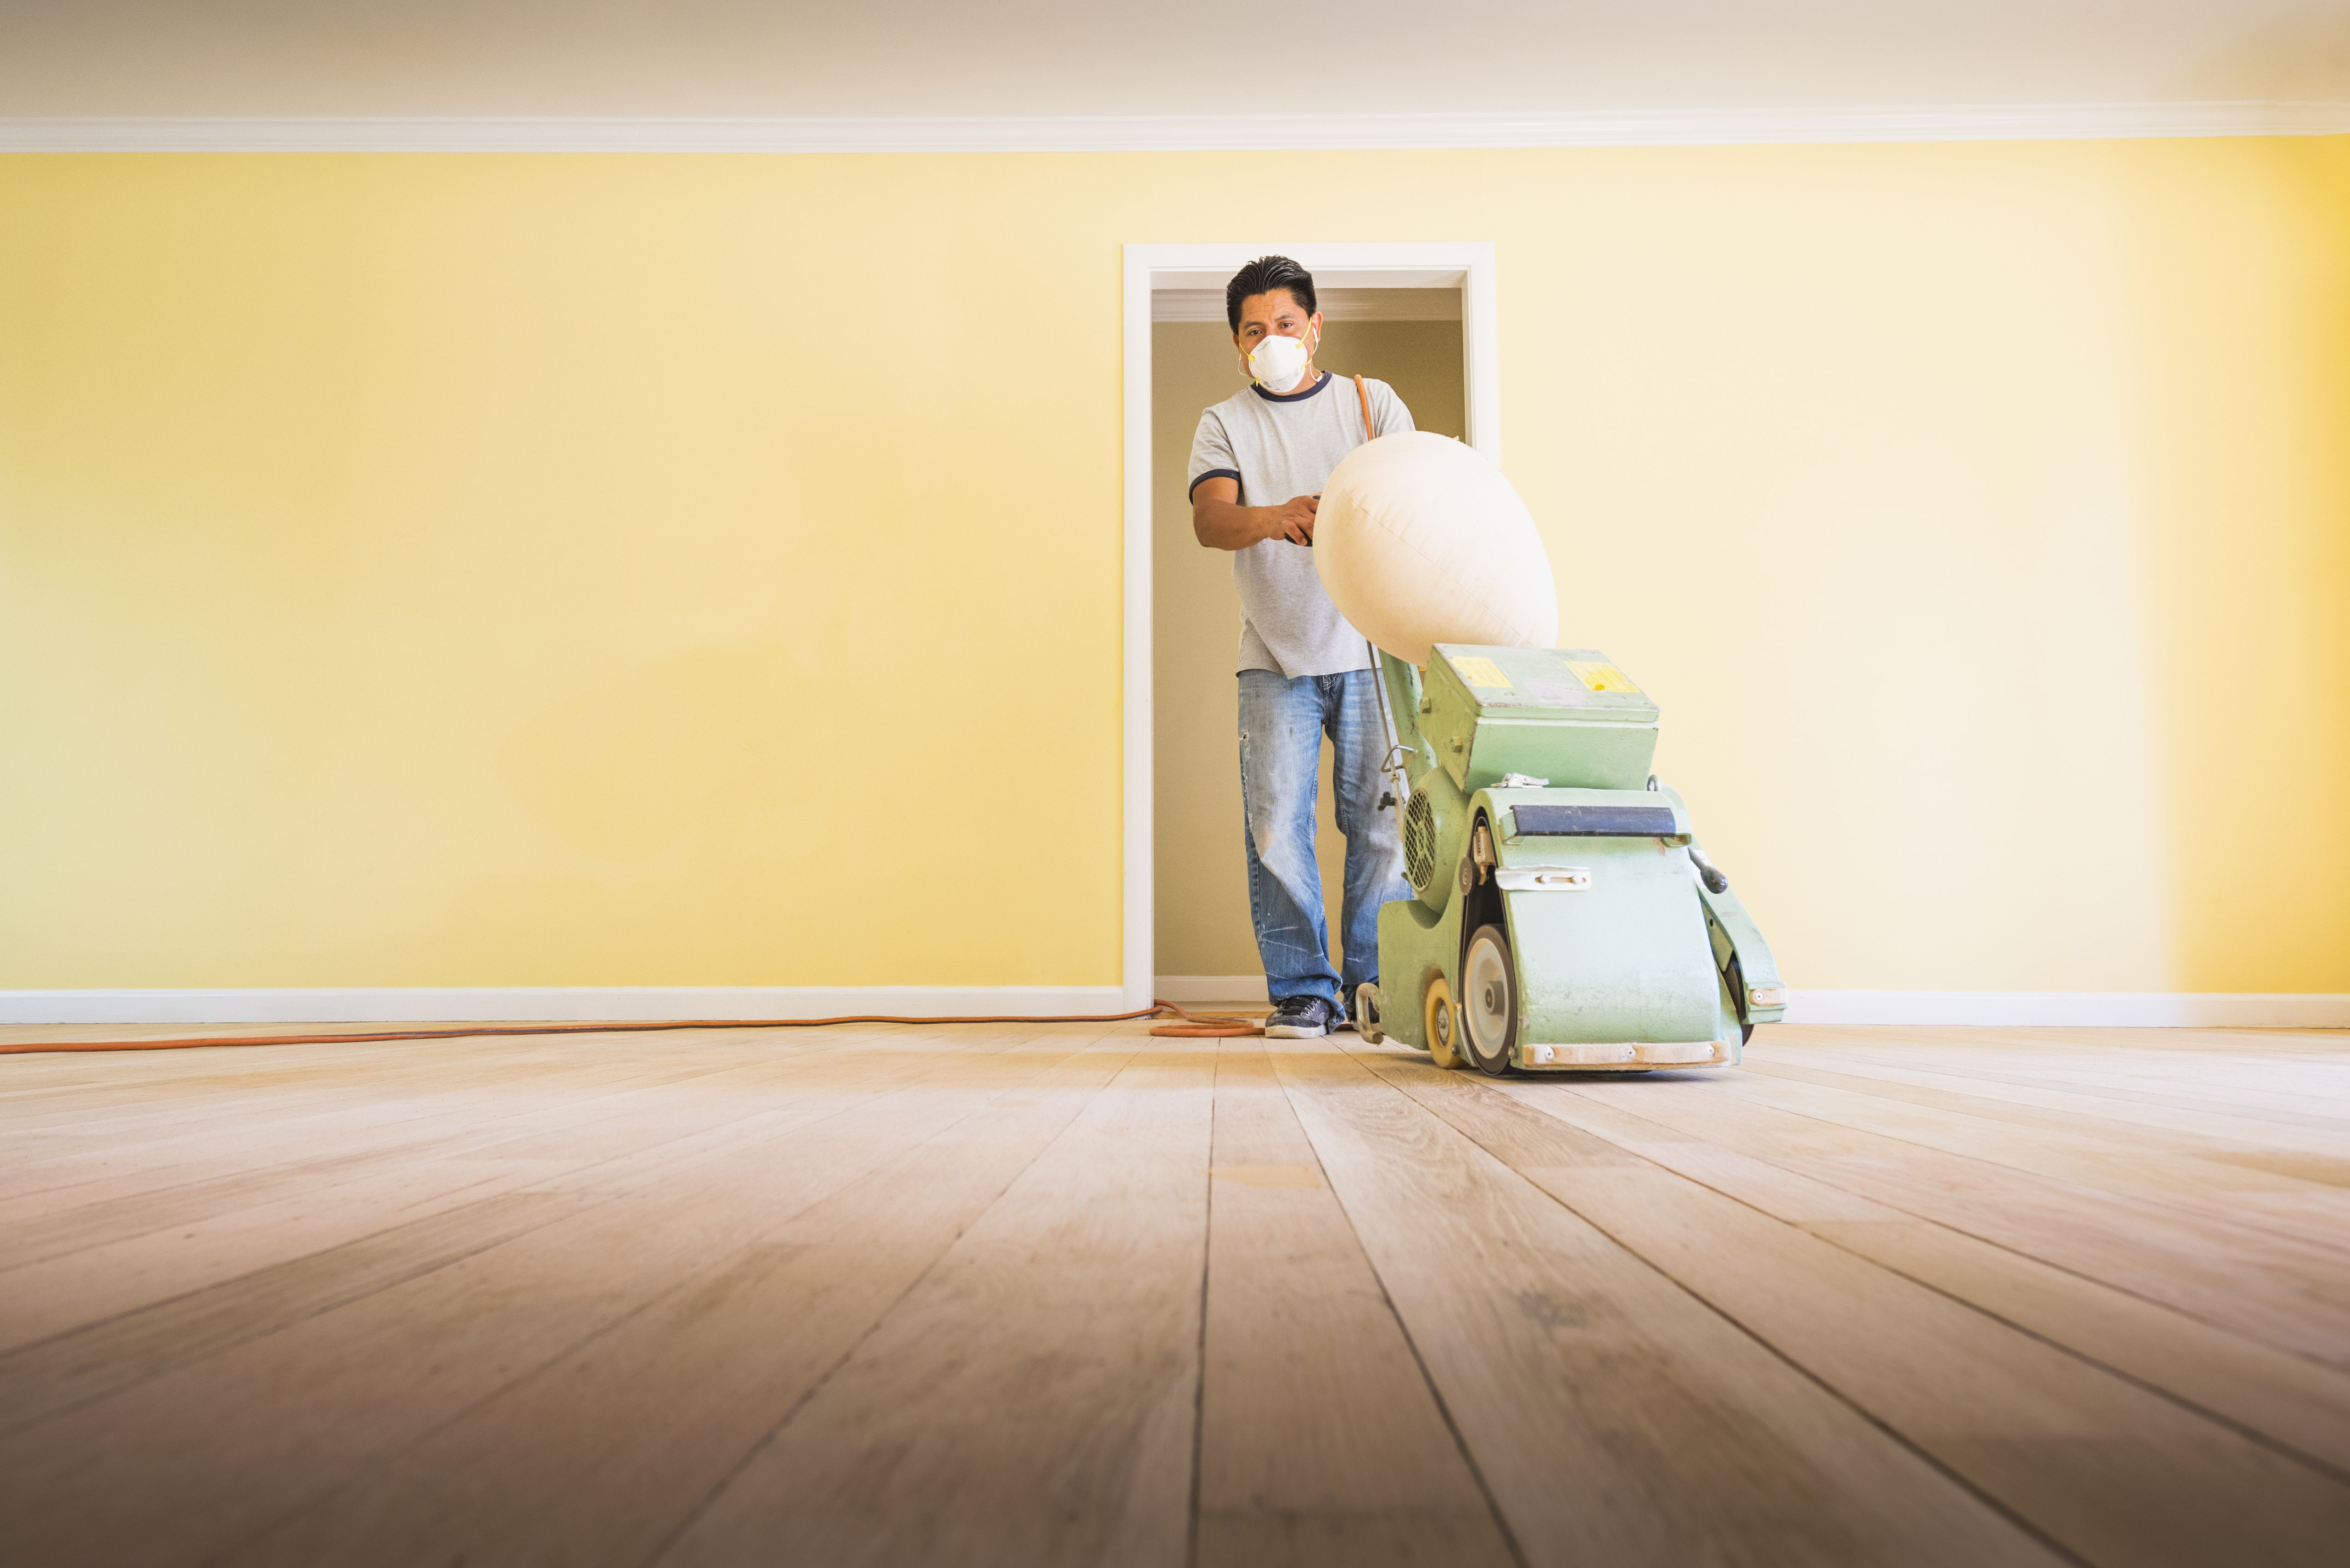 can you refinish hardwood floors without sanding of should you paint walls or refinish floors first in floorsandingafterpainting 5a8f08dfae9ab80037d9d878